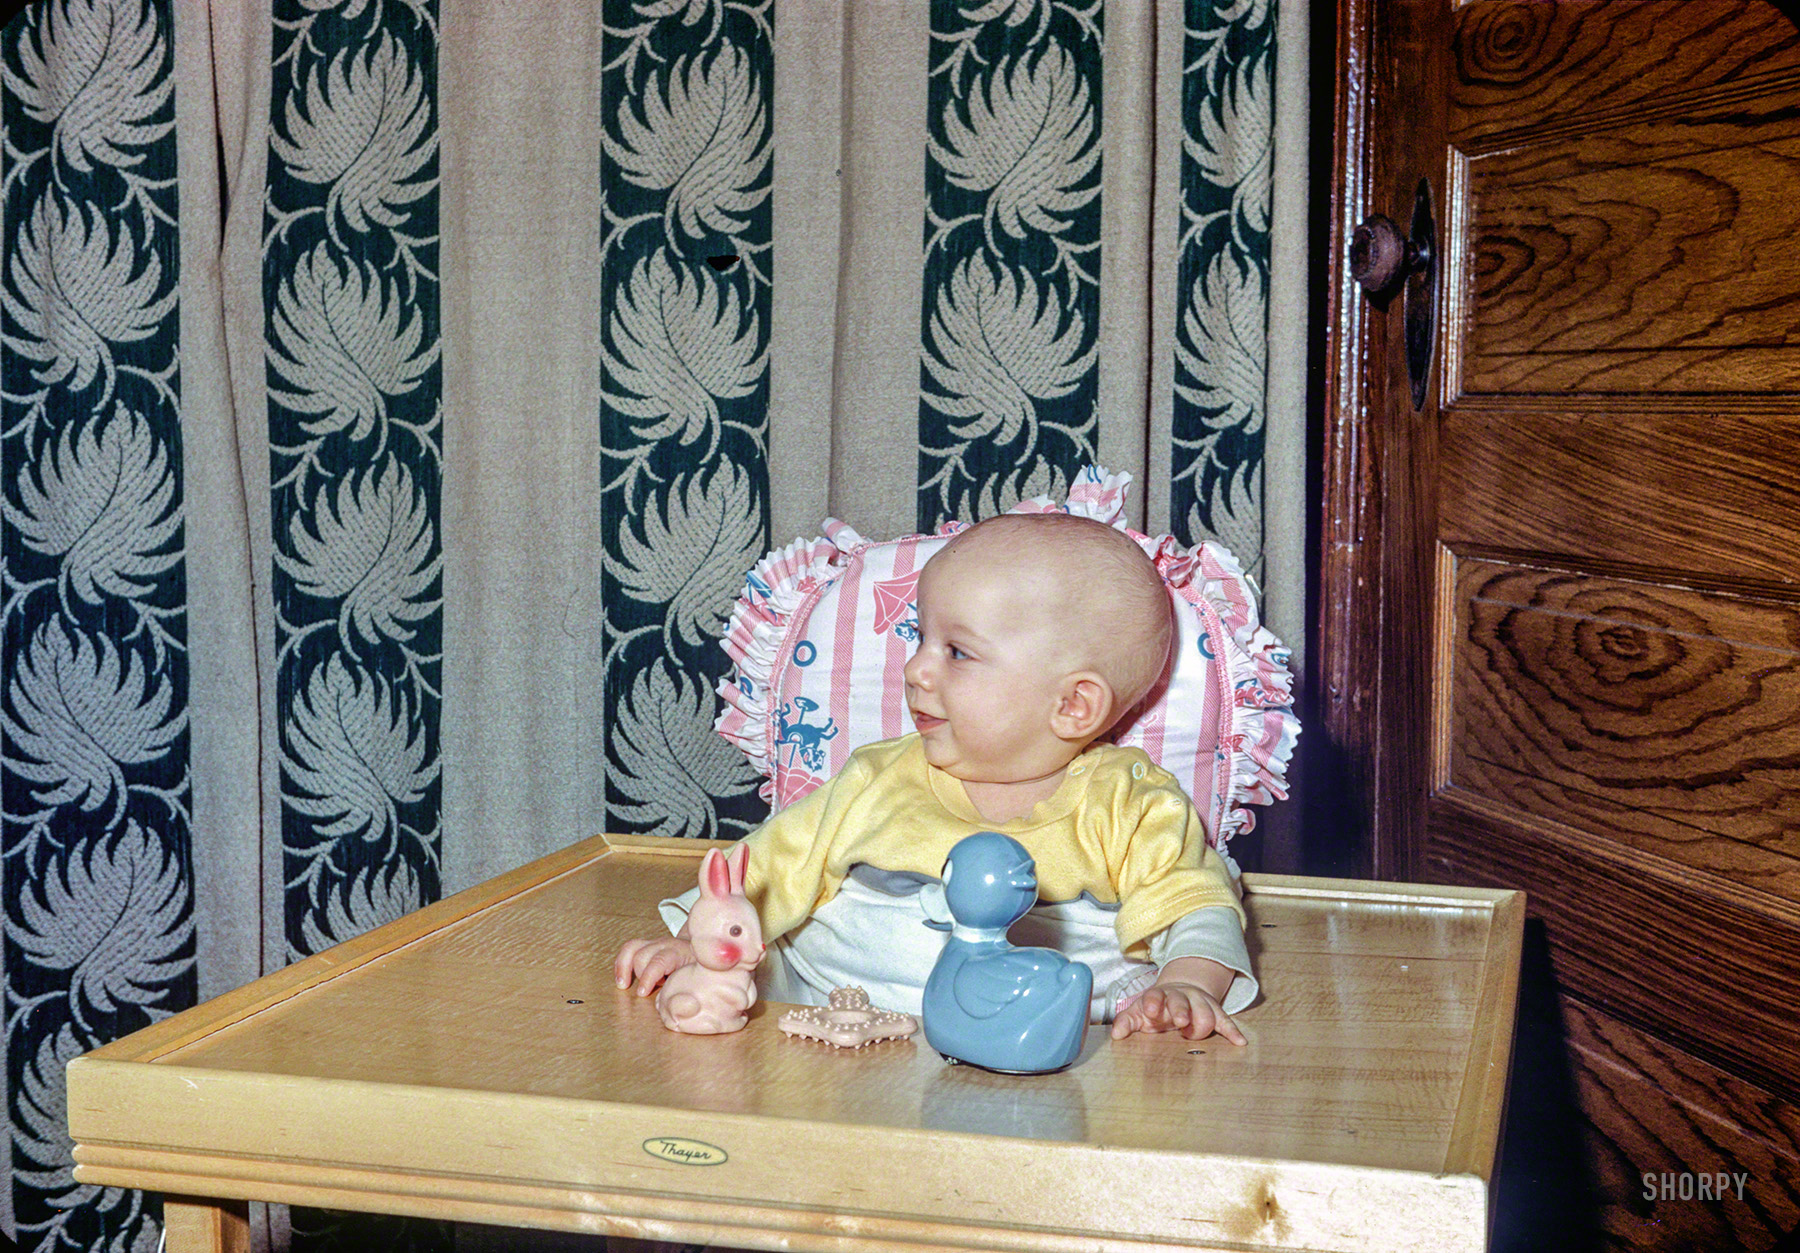 "This meeting of Ducky, Bunny & Baby Inc. is hereby called to order."
"Steven Lee -- 17 Feb 1952." The latest episode of Minnesota Kodachromes focuses on the youth demographic. Color slide by Hubert Tuttle. View full size.